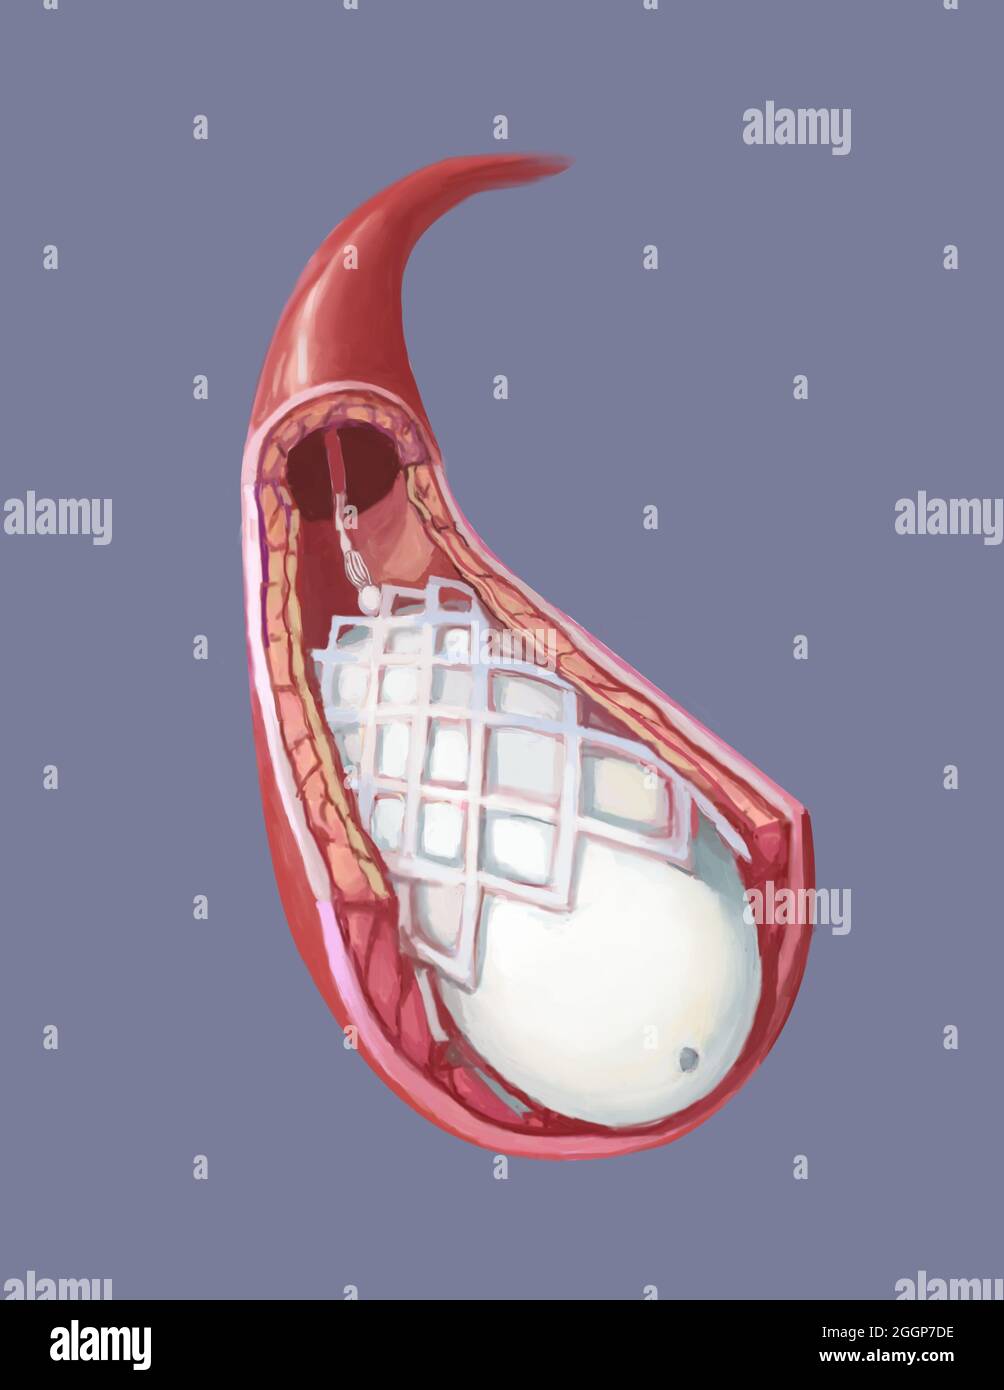 Medical illustration showing balloon angioplasty and stent insertion. Stock Photo